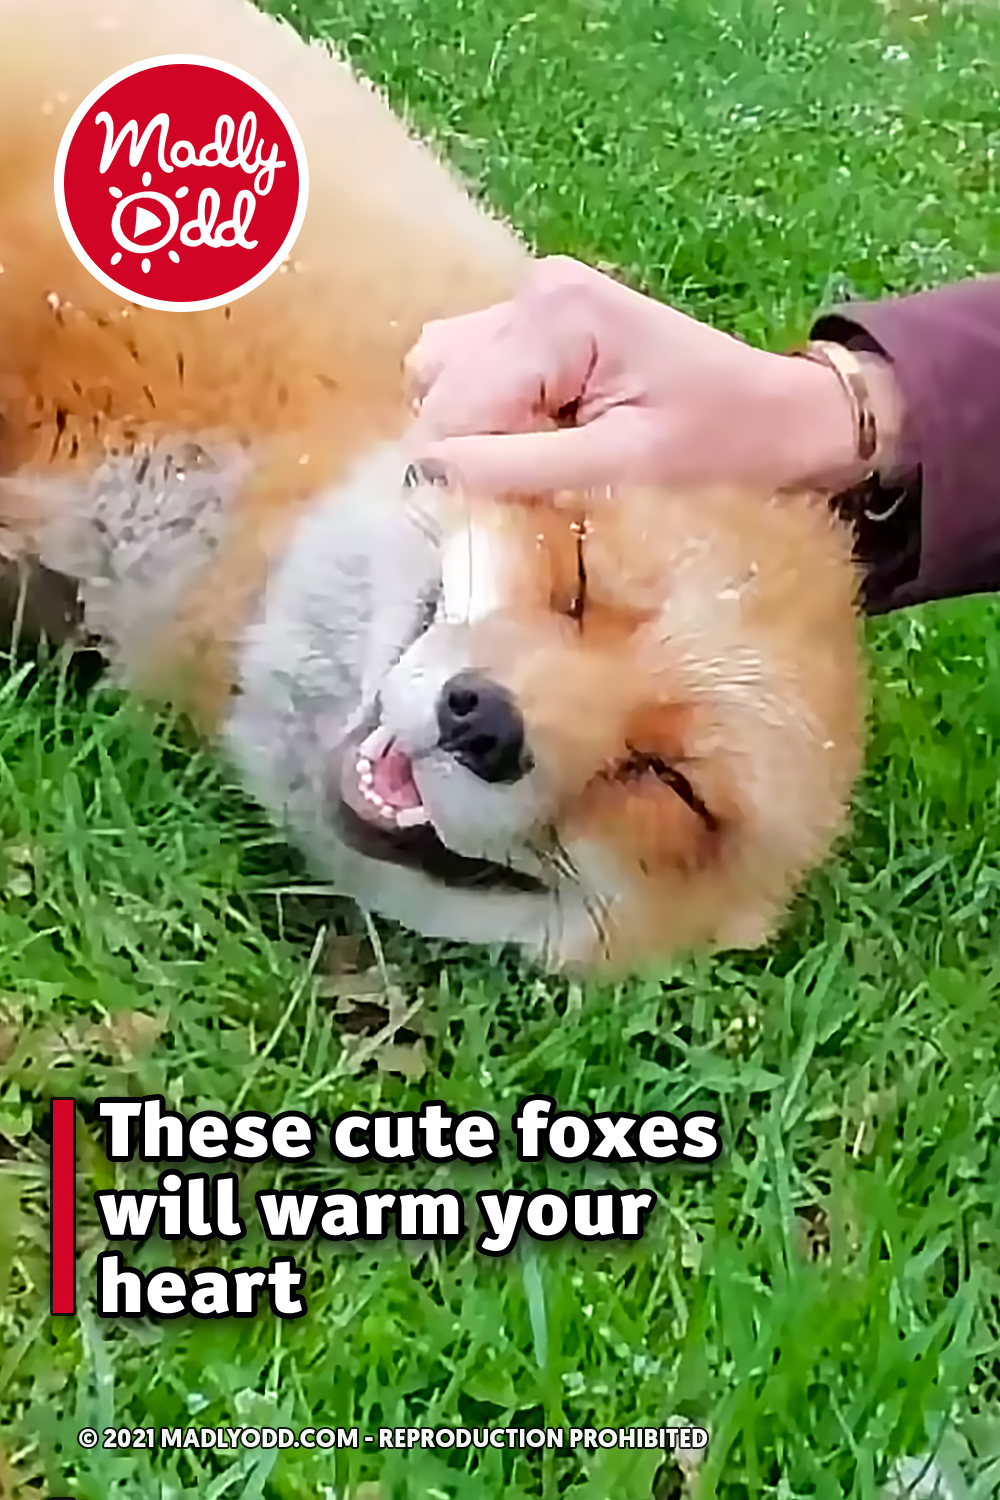 These cute foxes will warm your heart